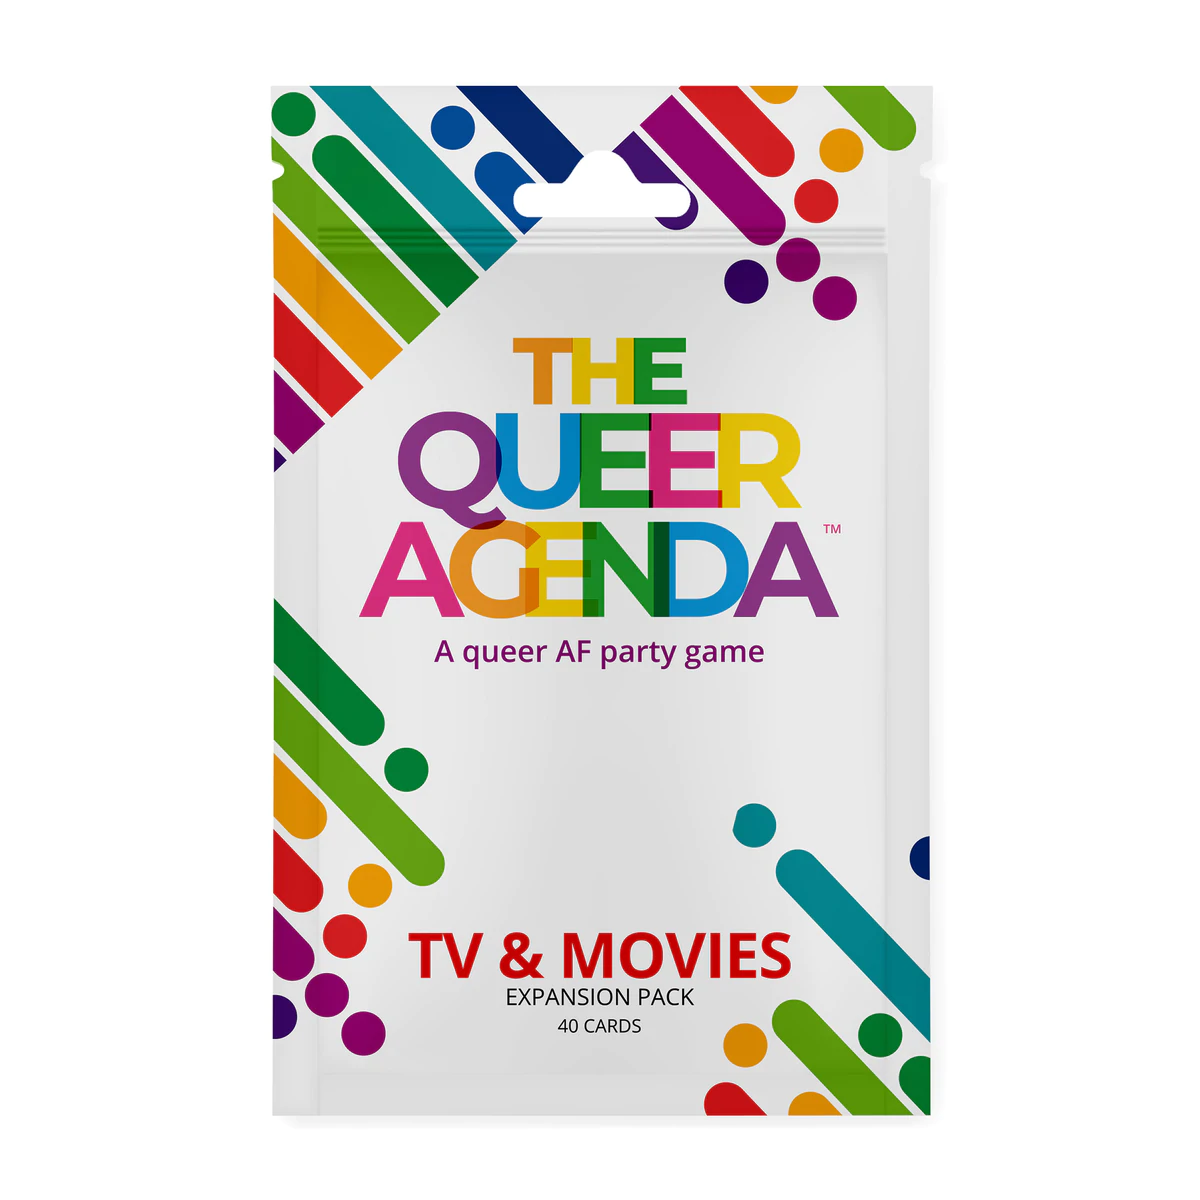 THE QUEER AGENDA TV & MOVIES PACK